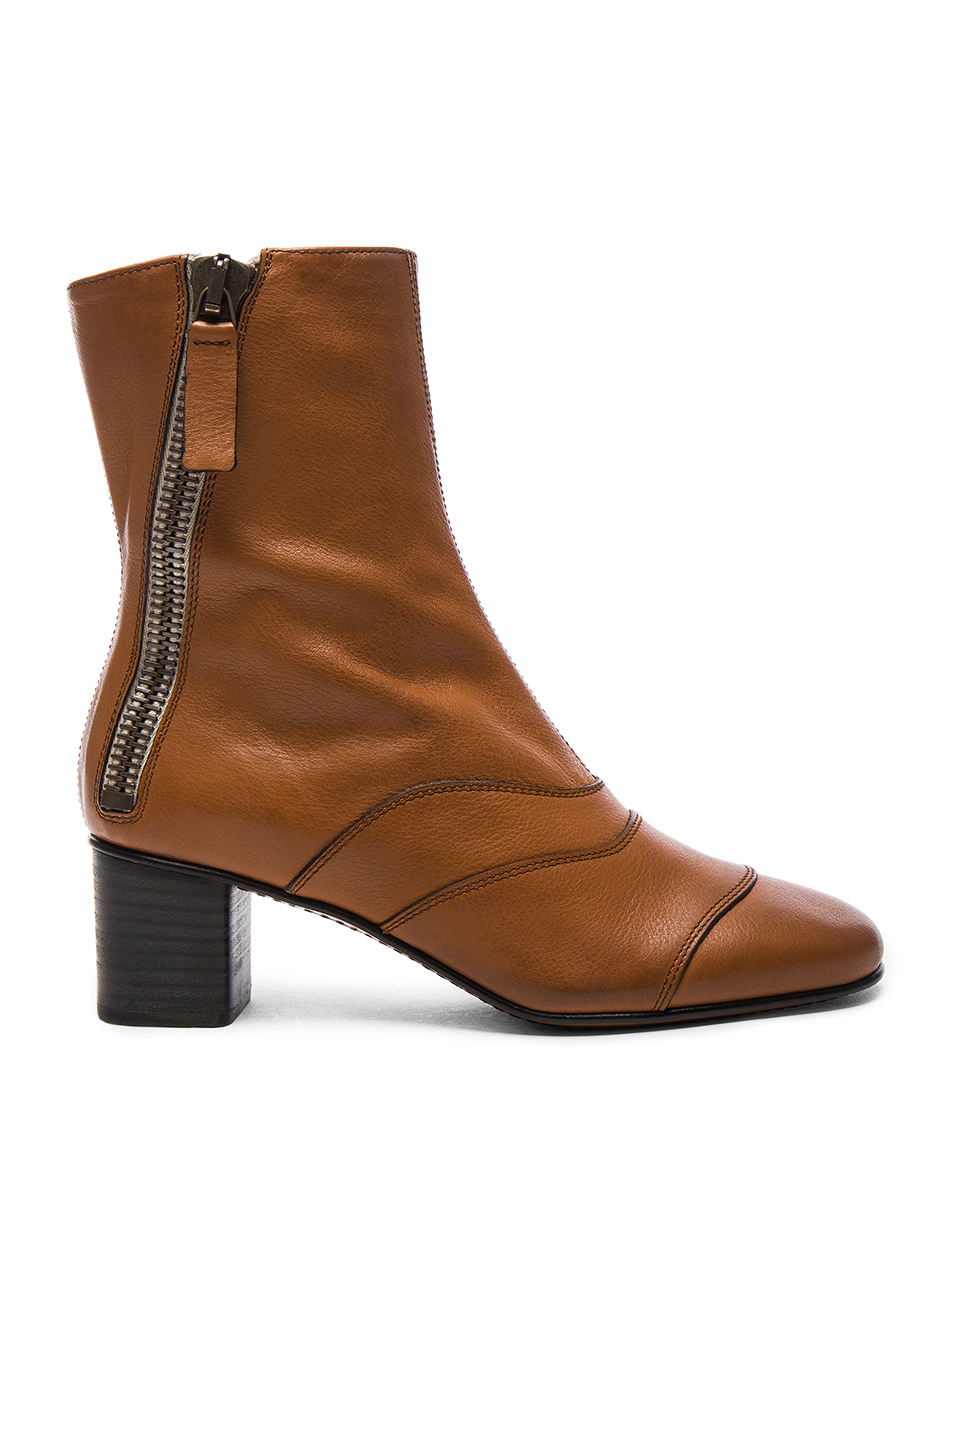 Chloé Leather Lexie Low Boots In Tan | ModeSens